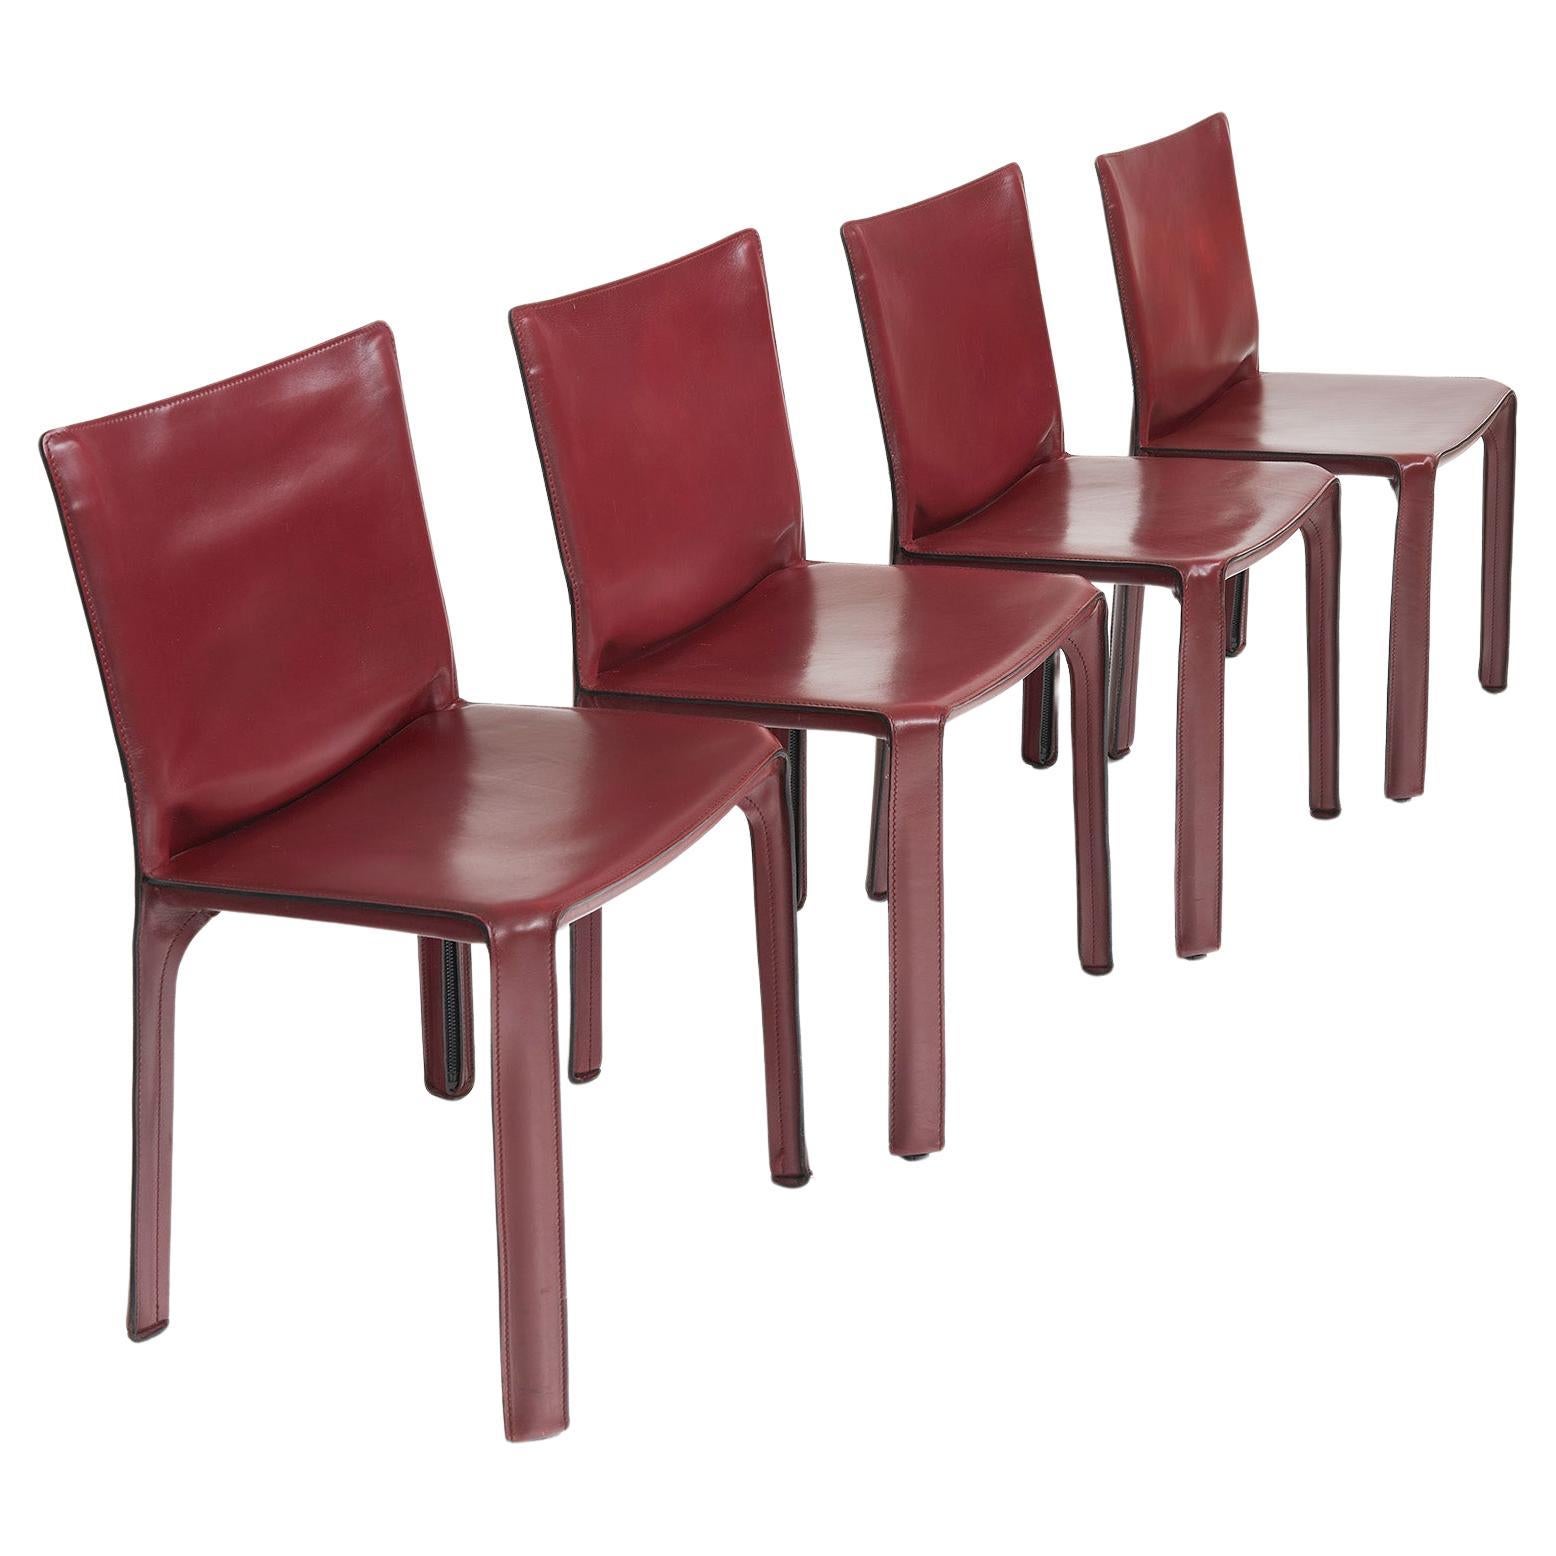 Set of 4 CAB burgundy leather chairs by Mario Bellini for Cassina, Italy 